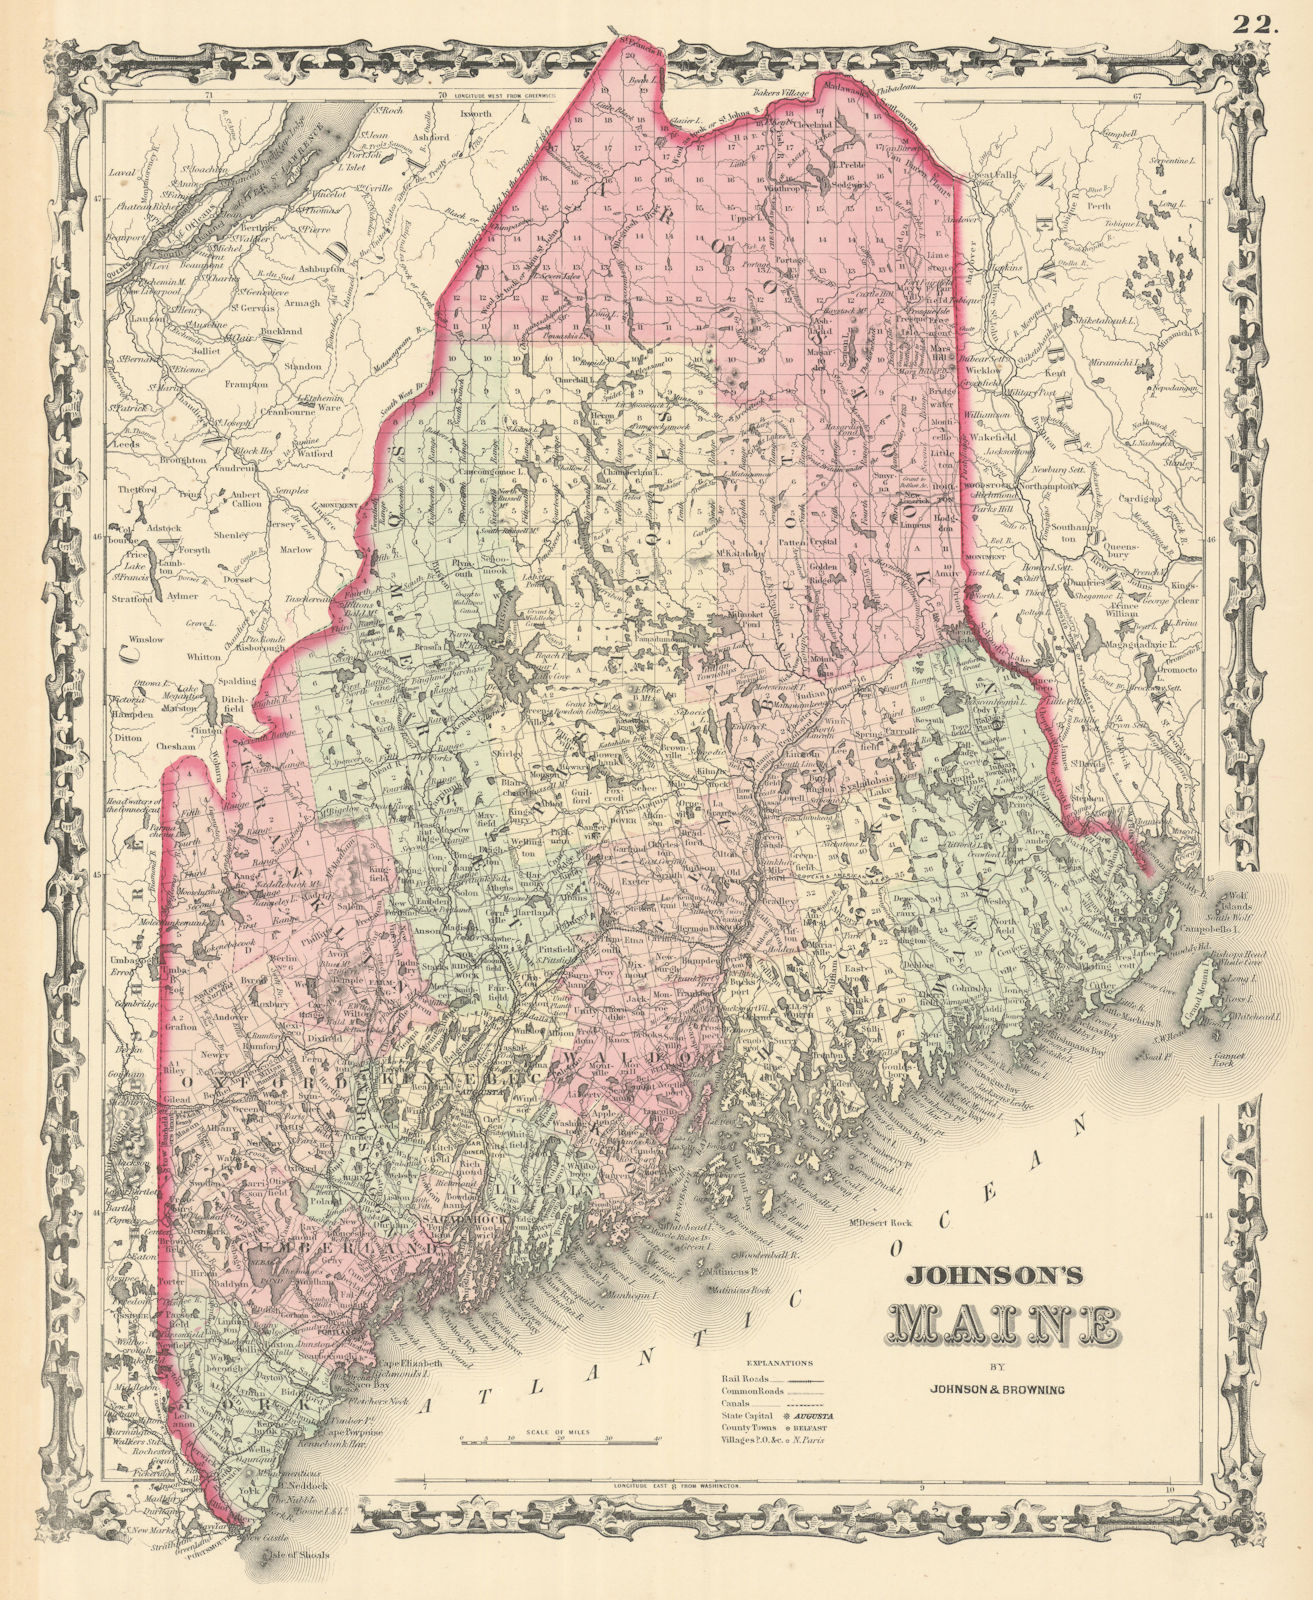 Johnson's Maine. US State map showing counties. New England 1861 old